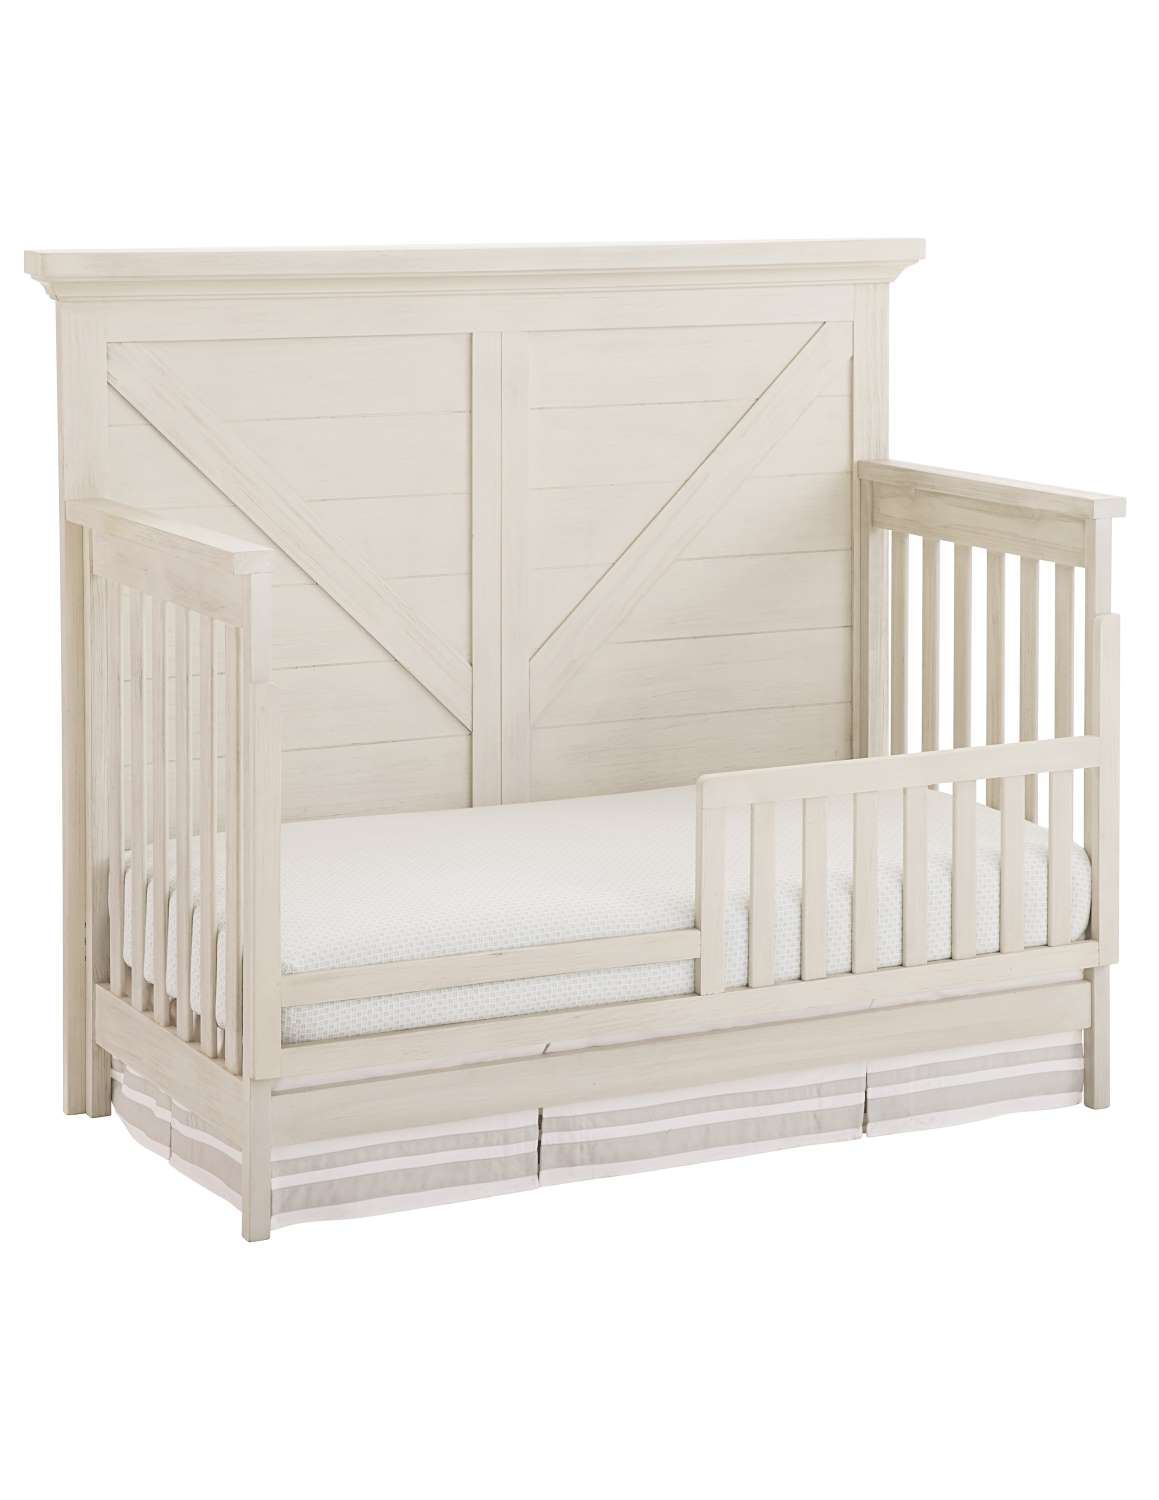 Westfield Toddler Guard Rail - Brushed White